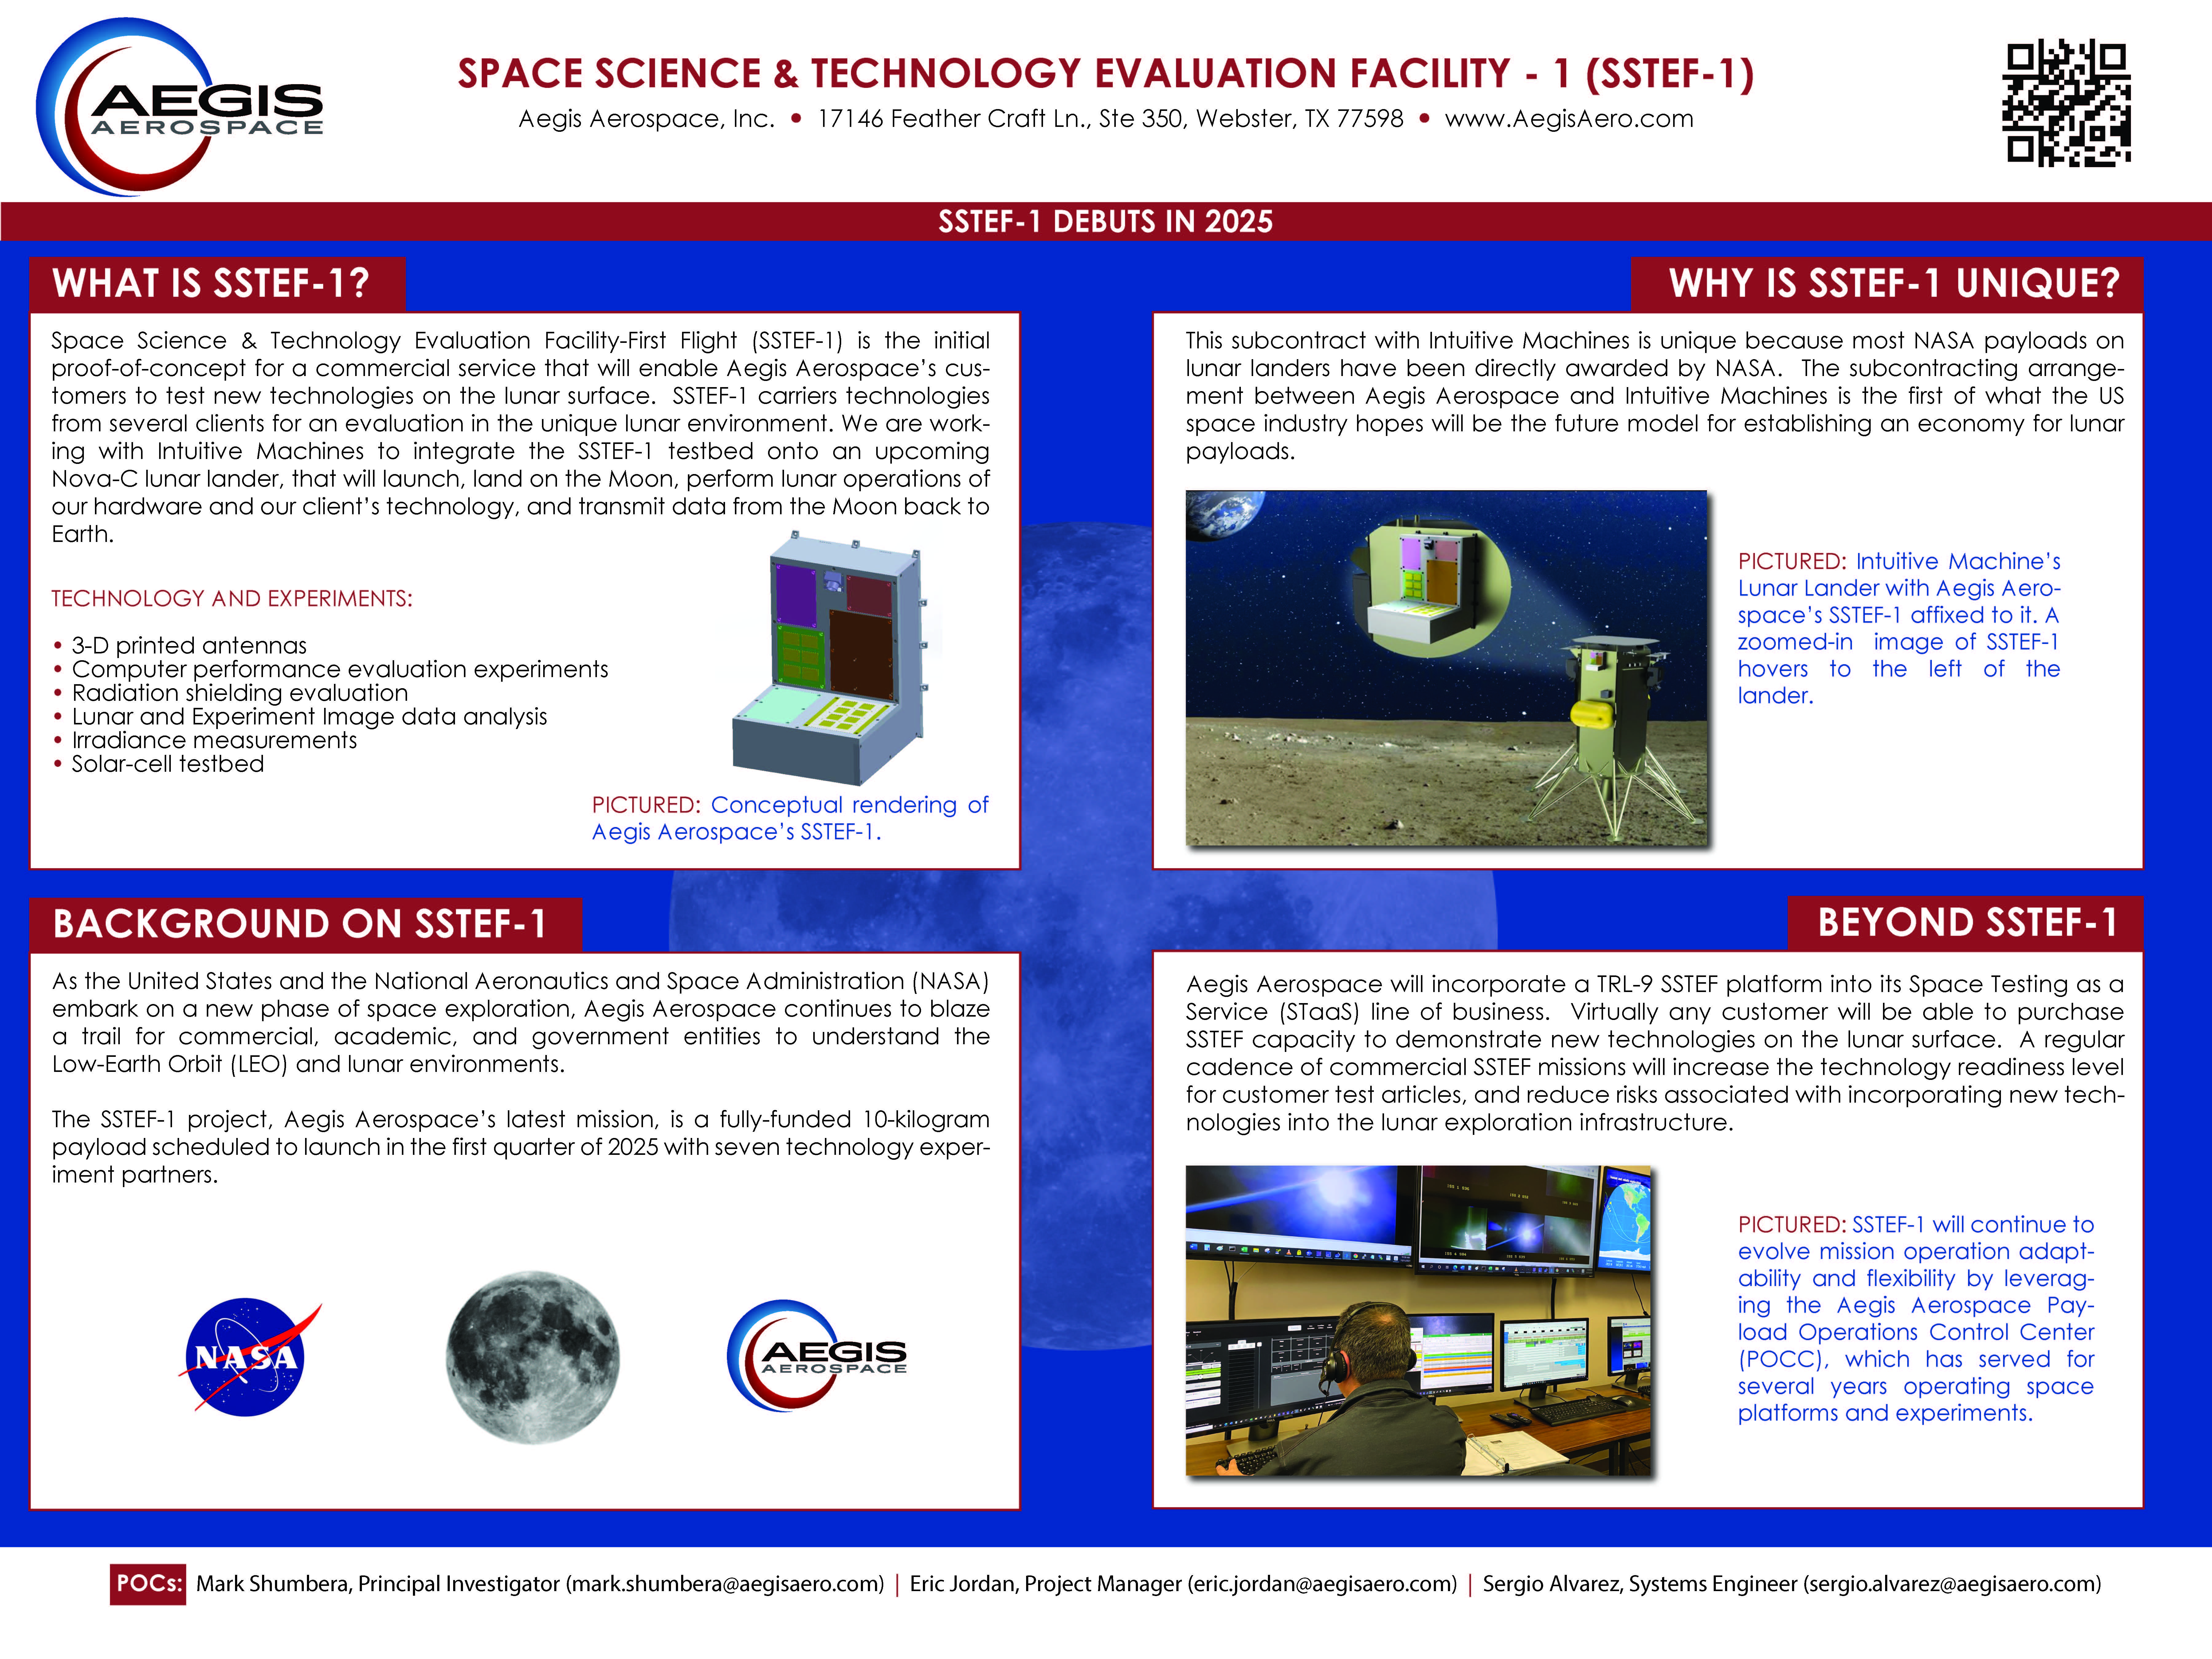 Space Science & Technology Evaluation Facility